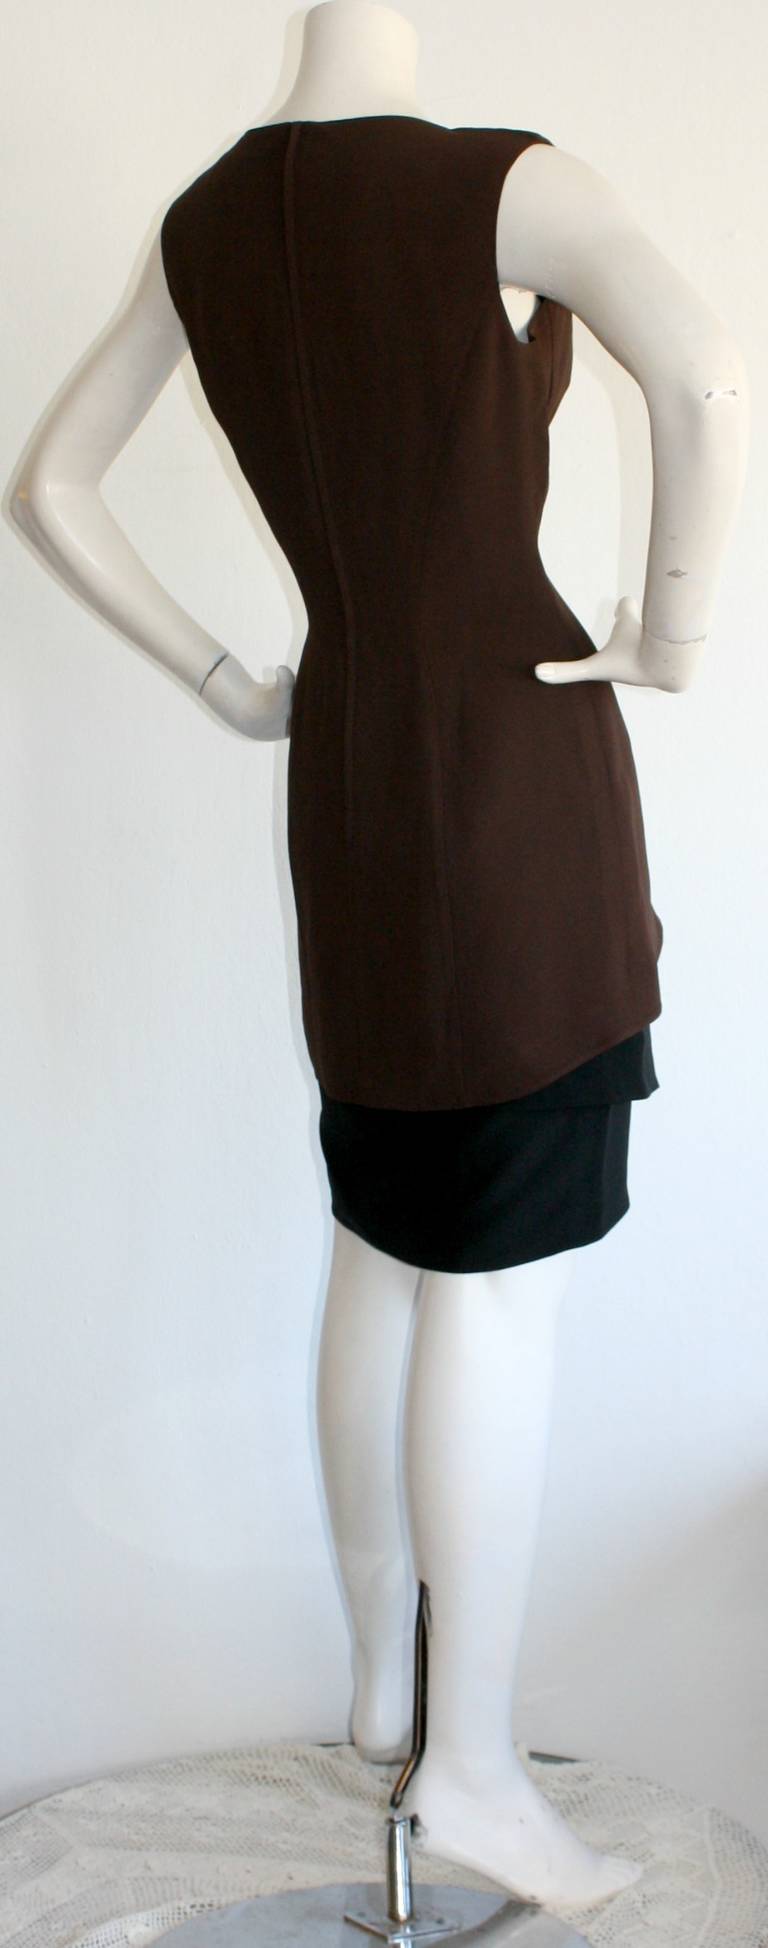 Iconic Thierry Mugler Vintage Color Block Brown and Black Scuba Dress ...